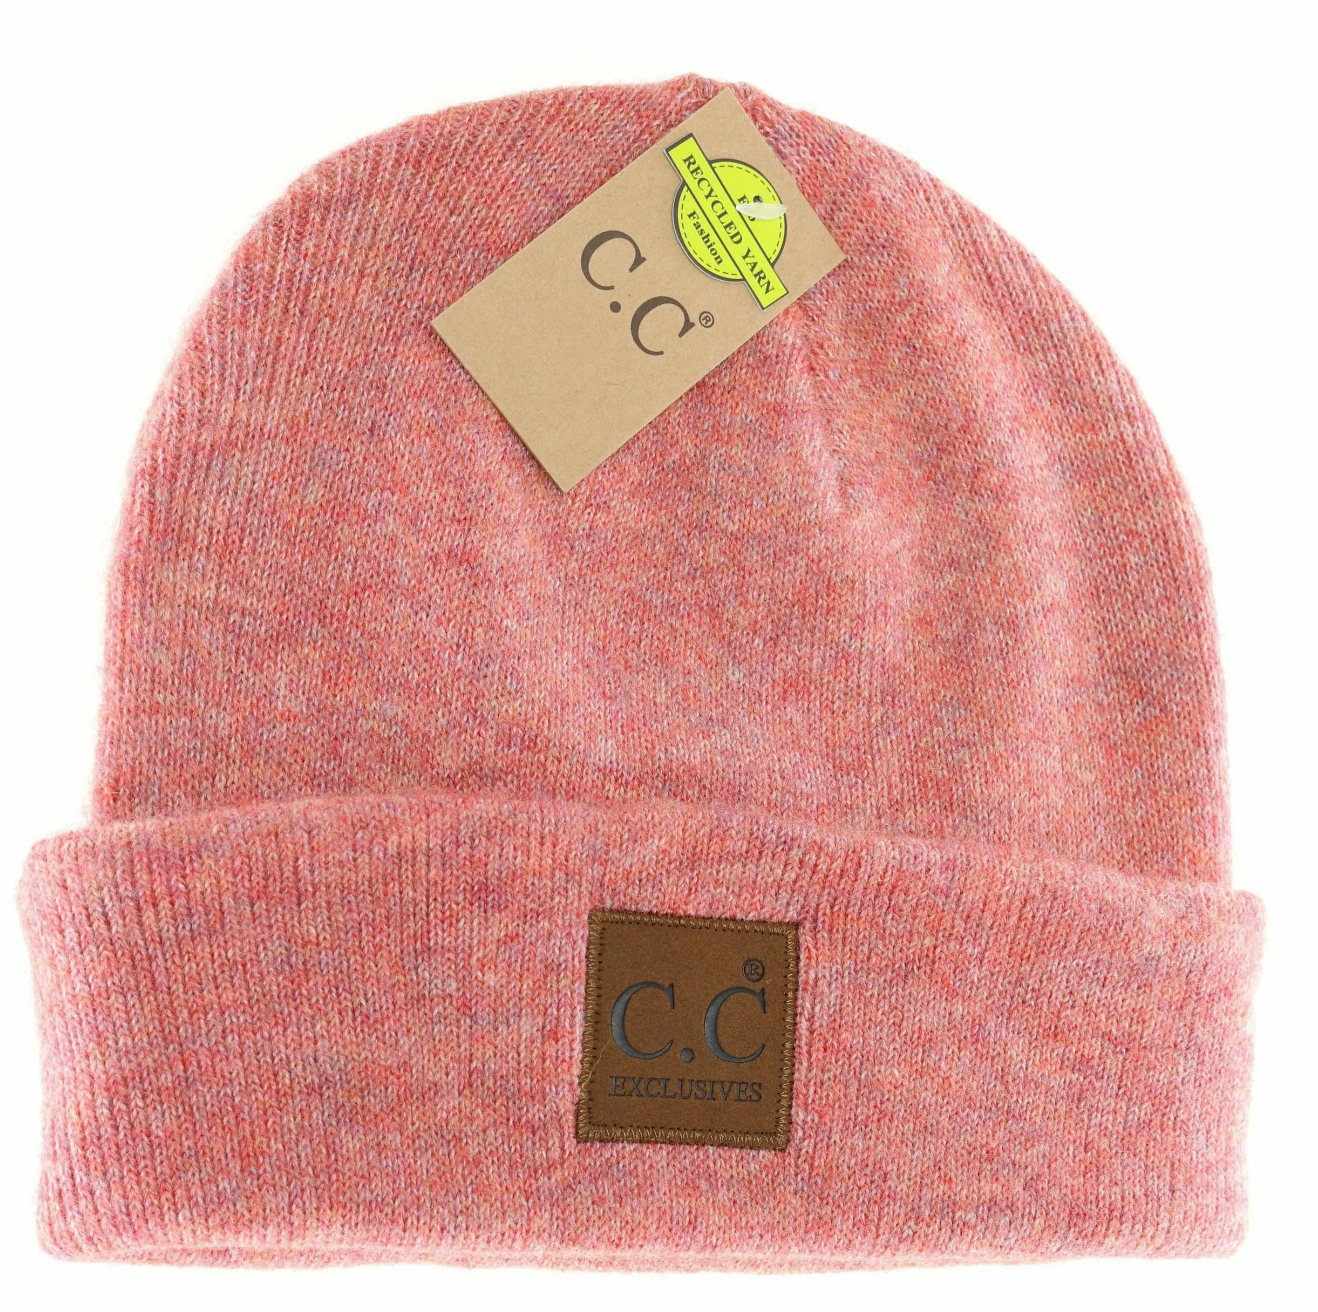 Unisex Soft Ribbed Leather Patch C.C. Beanie